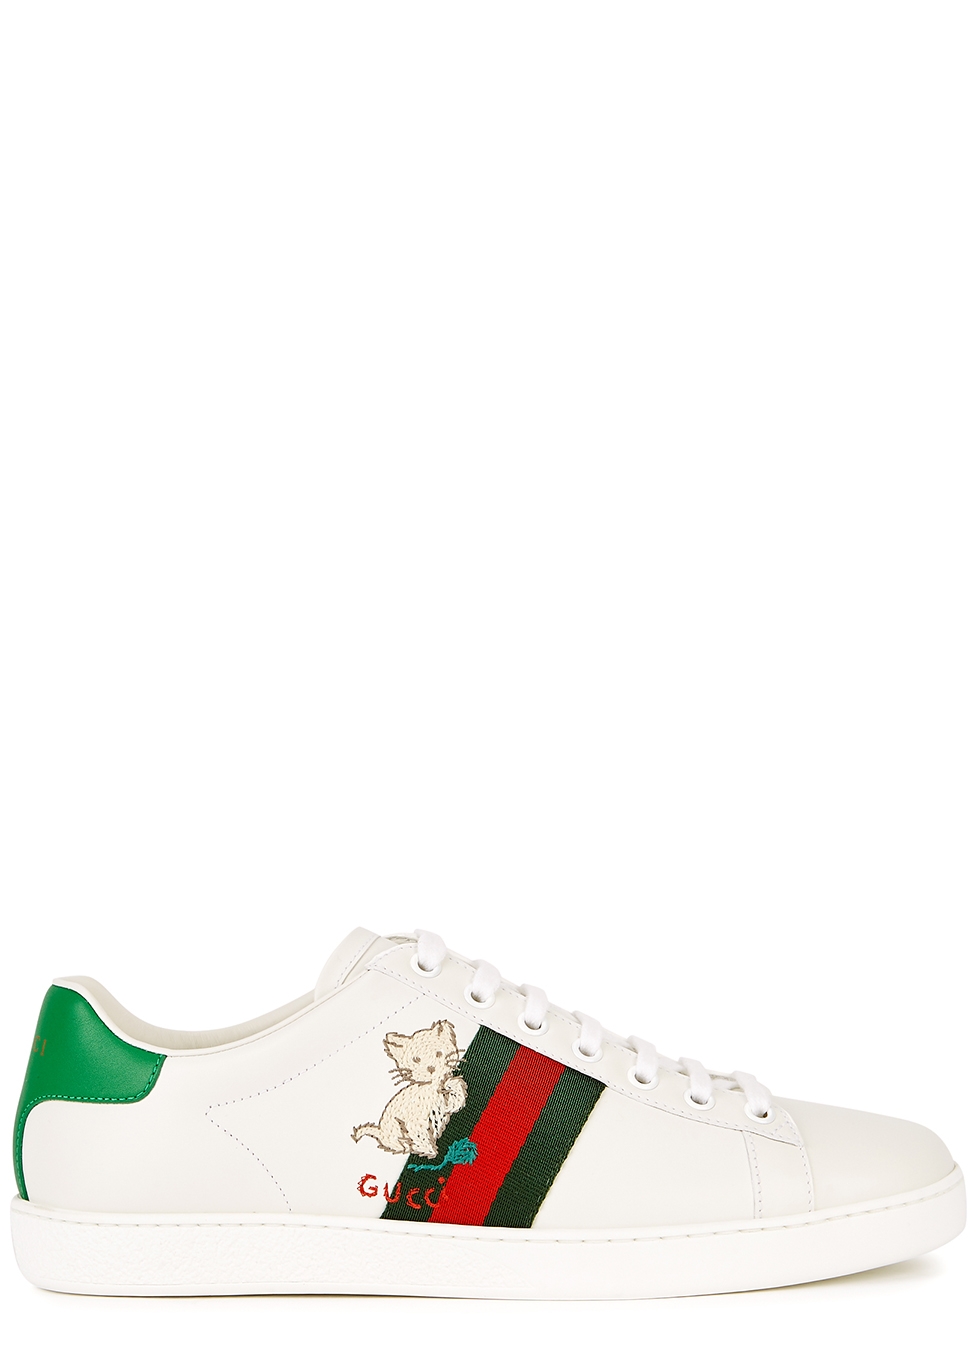 gucci sneakers pig